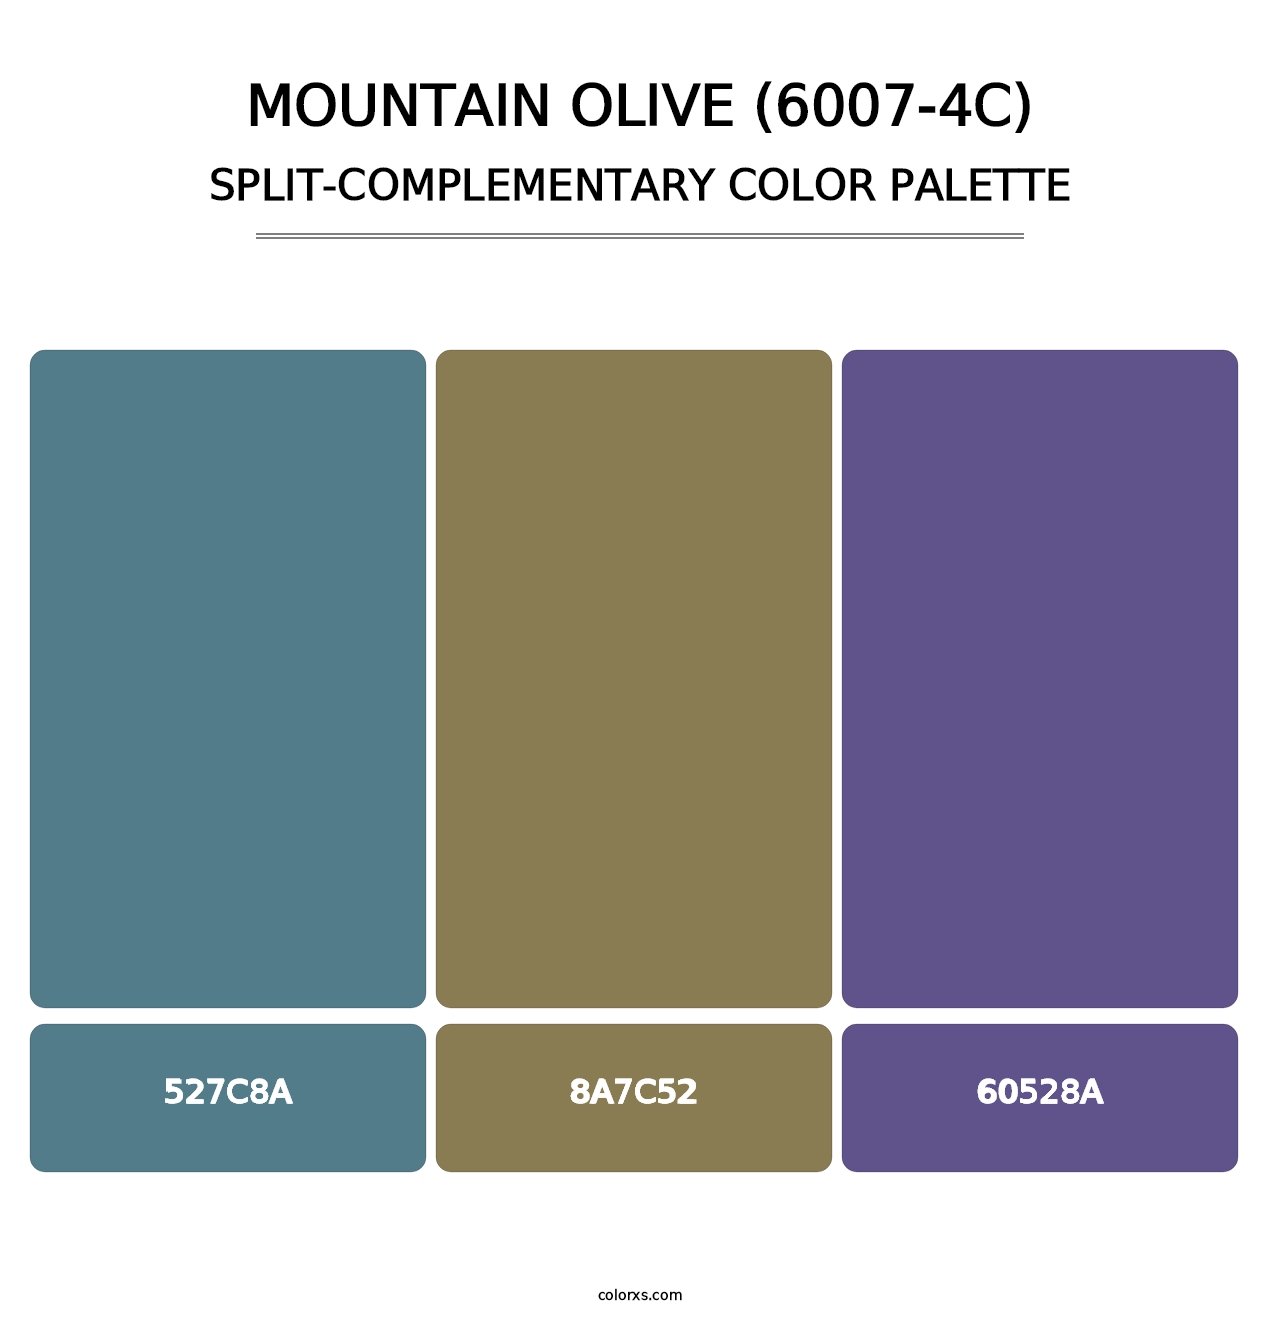 Mountain Olive (6007-4C) - Split-Complementary Color Palette